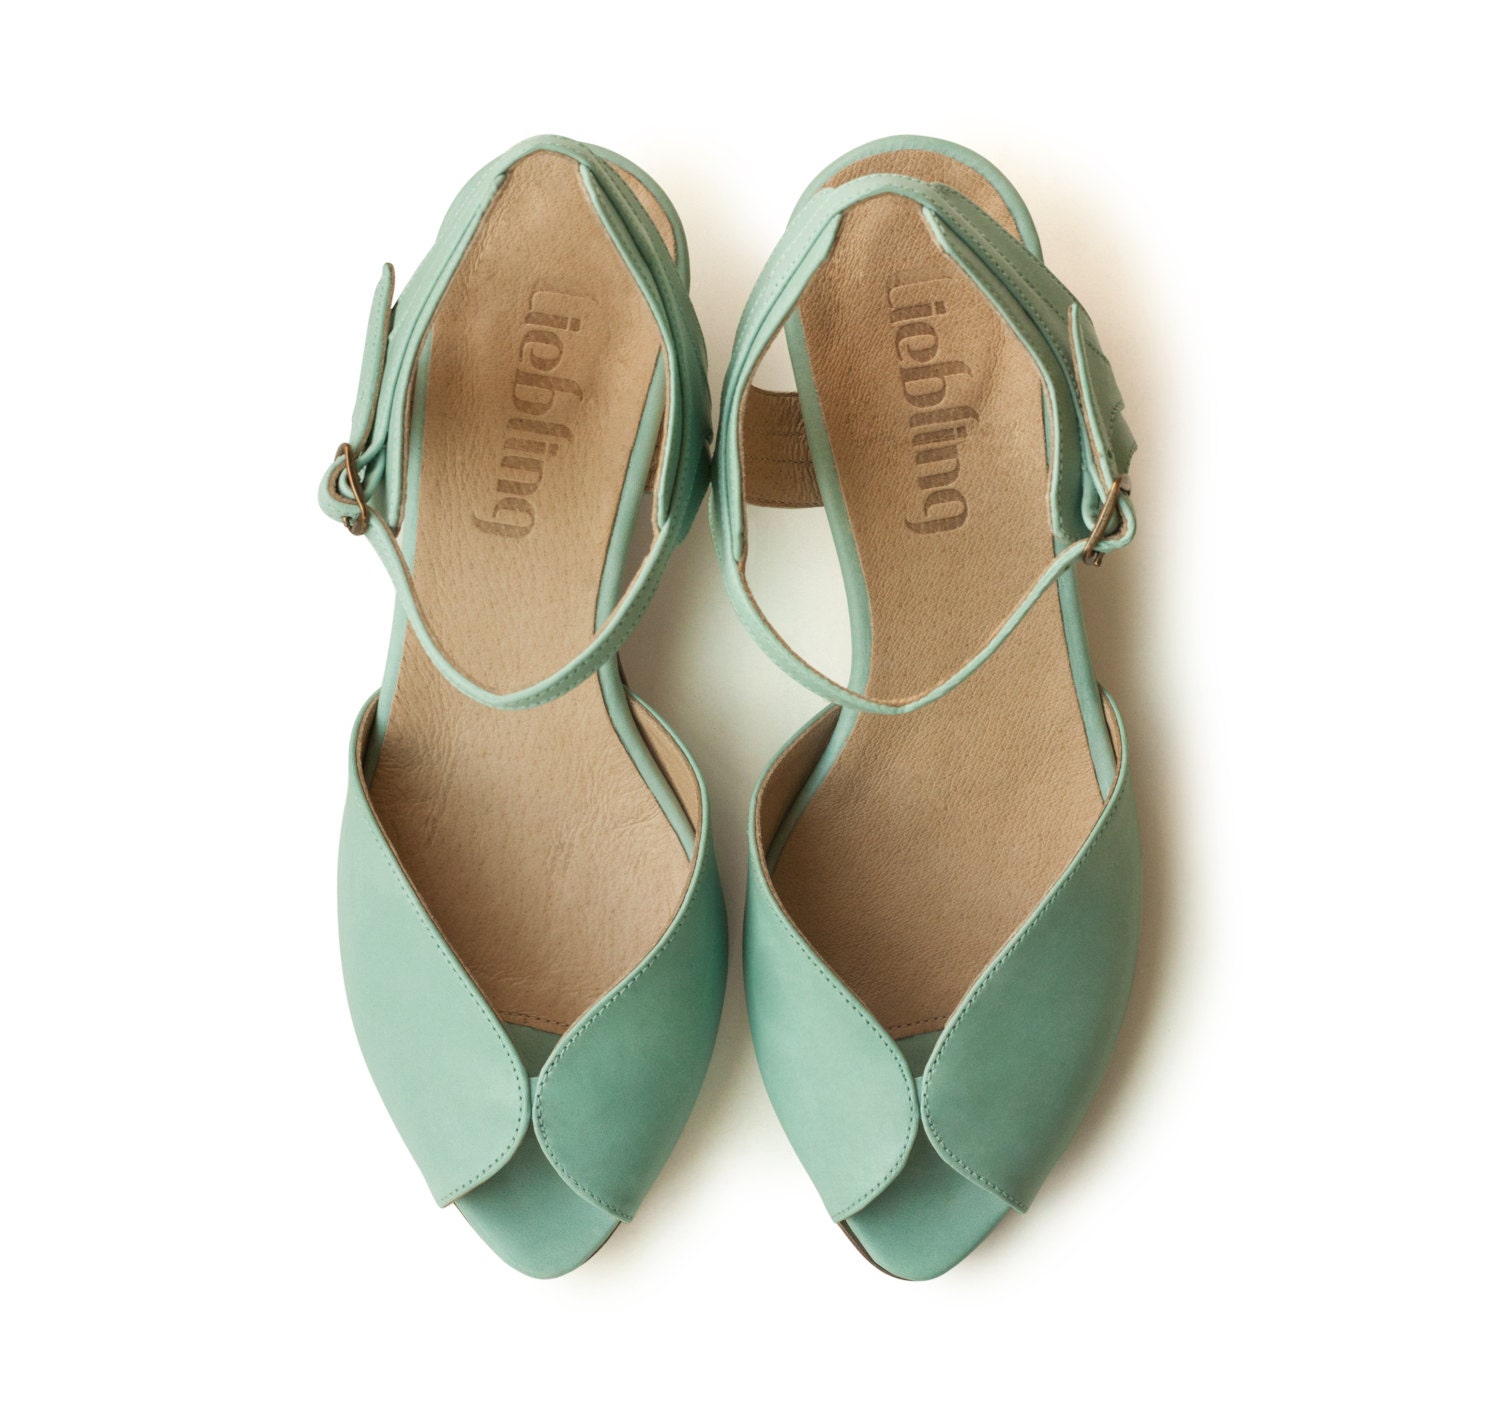 New Mint Adelle Sandals Handmade Leather shoes green